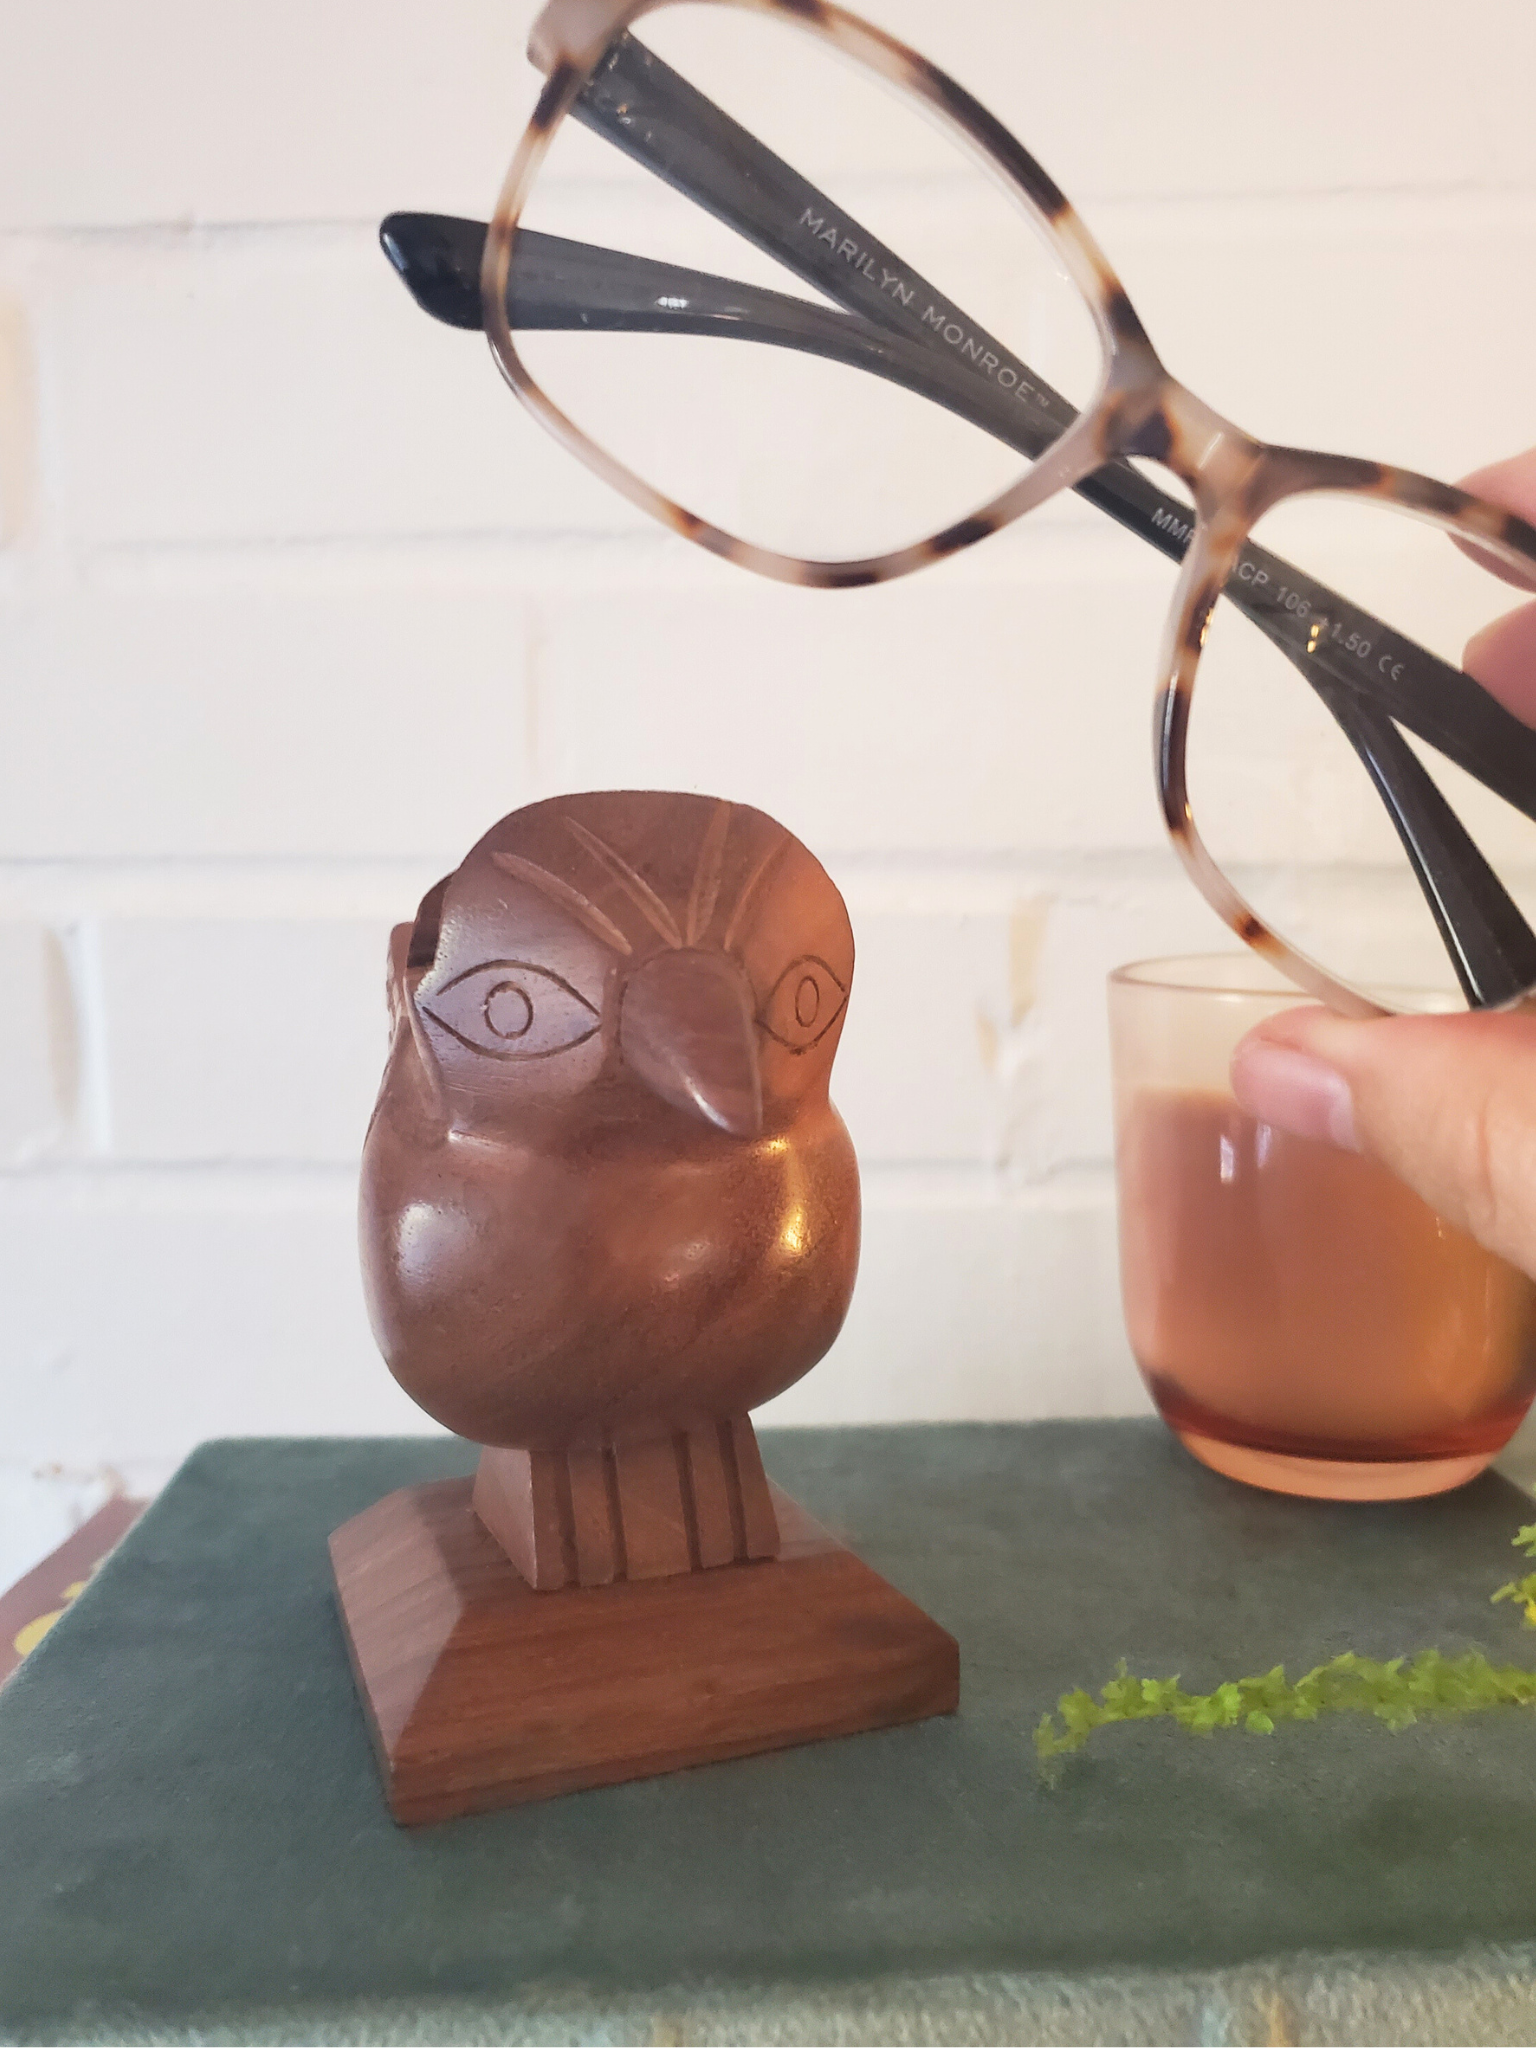 Eyeglass holder – Shop with a Mission